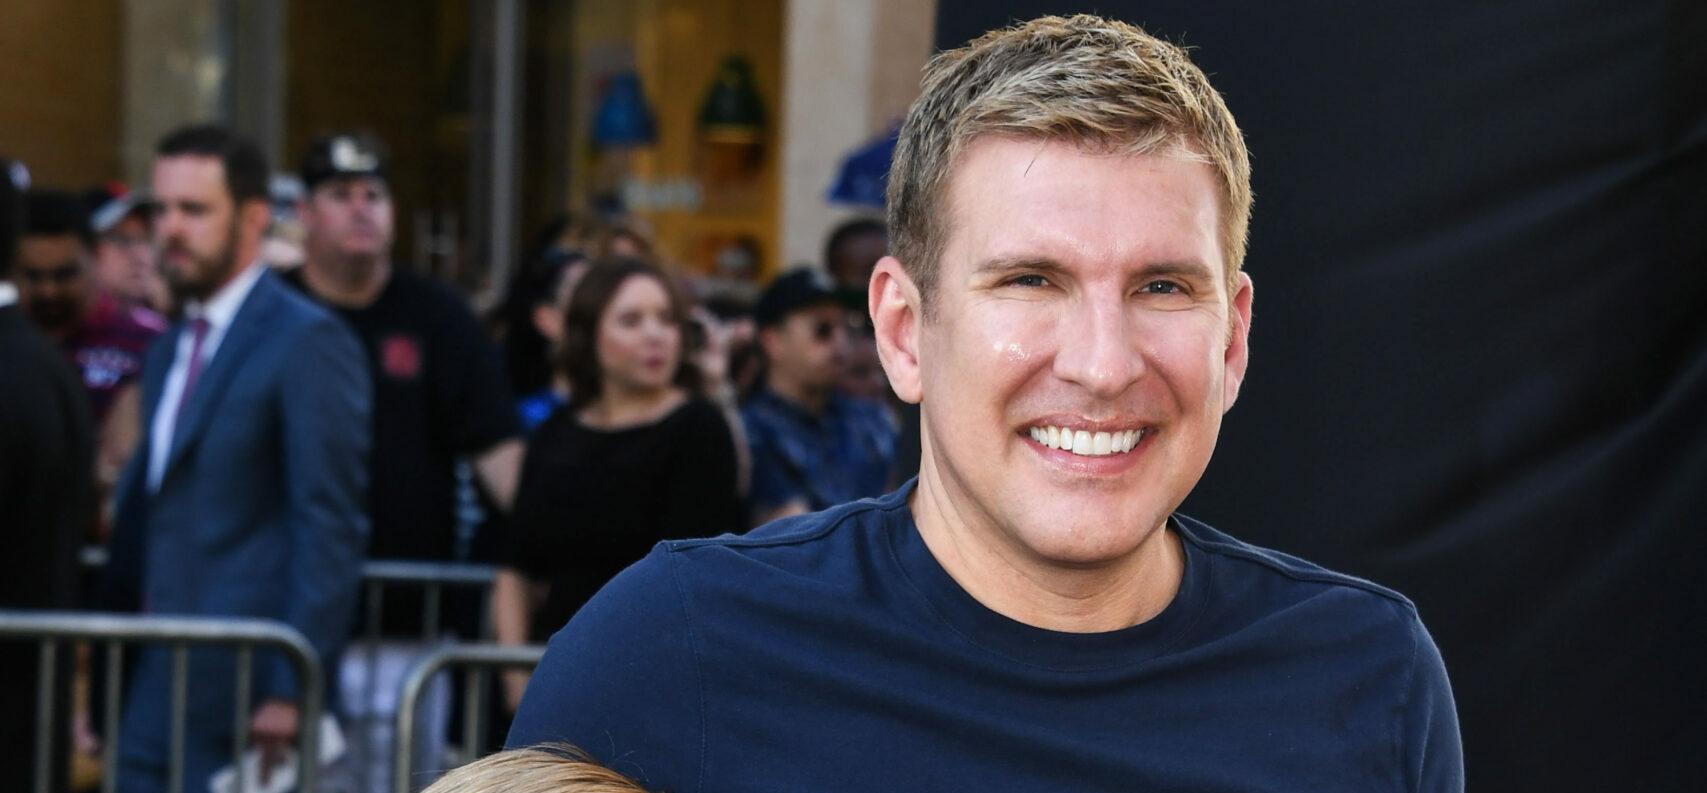 Todd Chrisley APPALLED By Claims He Had Affair With Ex-Biz Associate